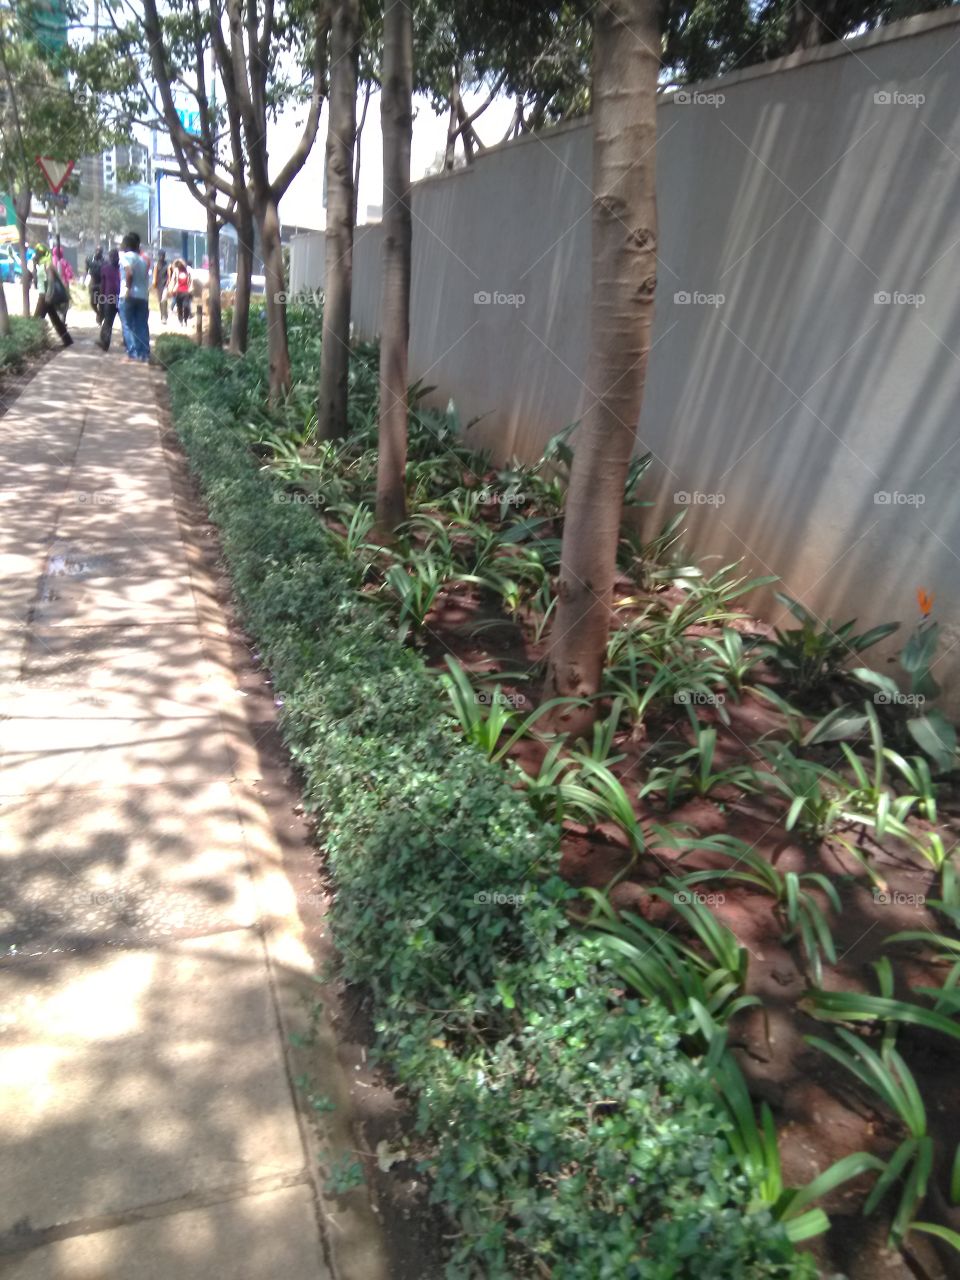 This photo shows a well taken care of garden outside a building alongside a pedestrian footpath in urban center in summer.